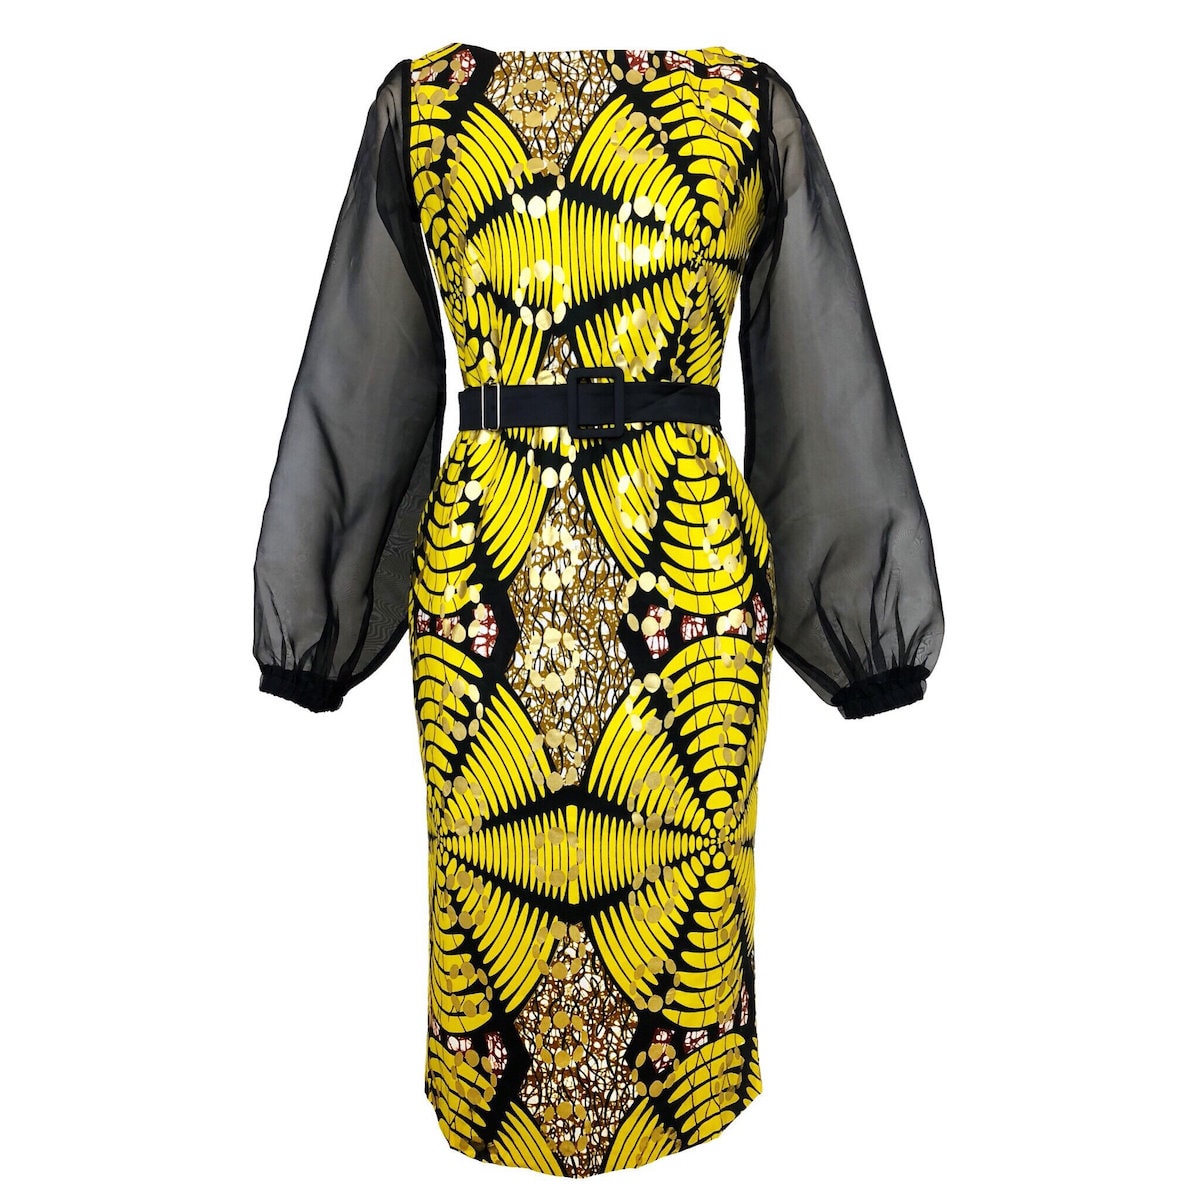 Who would have thought that African print clothes would look this good? Check out this stunning ankara print dress from this phenomenal designer. From ankara Dutch wax, Kente, to Kitenge and Dashiki. All your favorite styles in one place (+find out where to get them). Click to see all! Ankara, Dutch wax, Kente, Kitenge, Dashiki, African print dress, African fashion, African women dresses, African prints, Nigerian style, Ghanaian fashion, Senegal fashion, Kenya fashion, Nigerian fashion #africanprint #ankarastyles #africanfashion